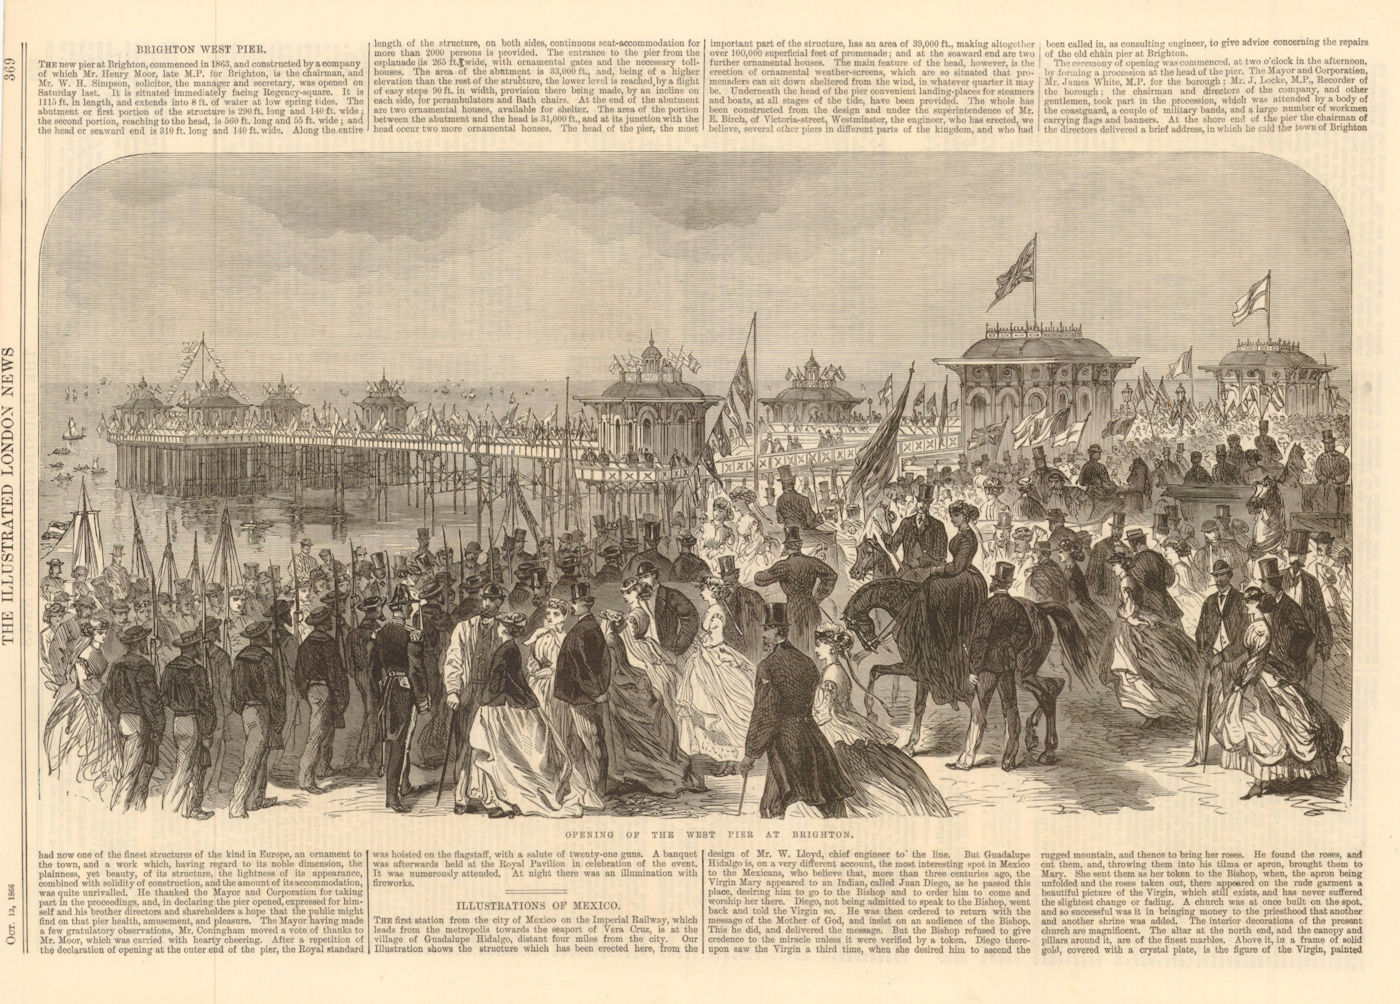 Associate Product Opening of the West Pier at Brighton. Sussex 1866 old antique print picture